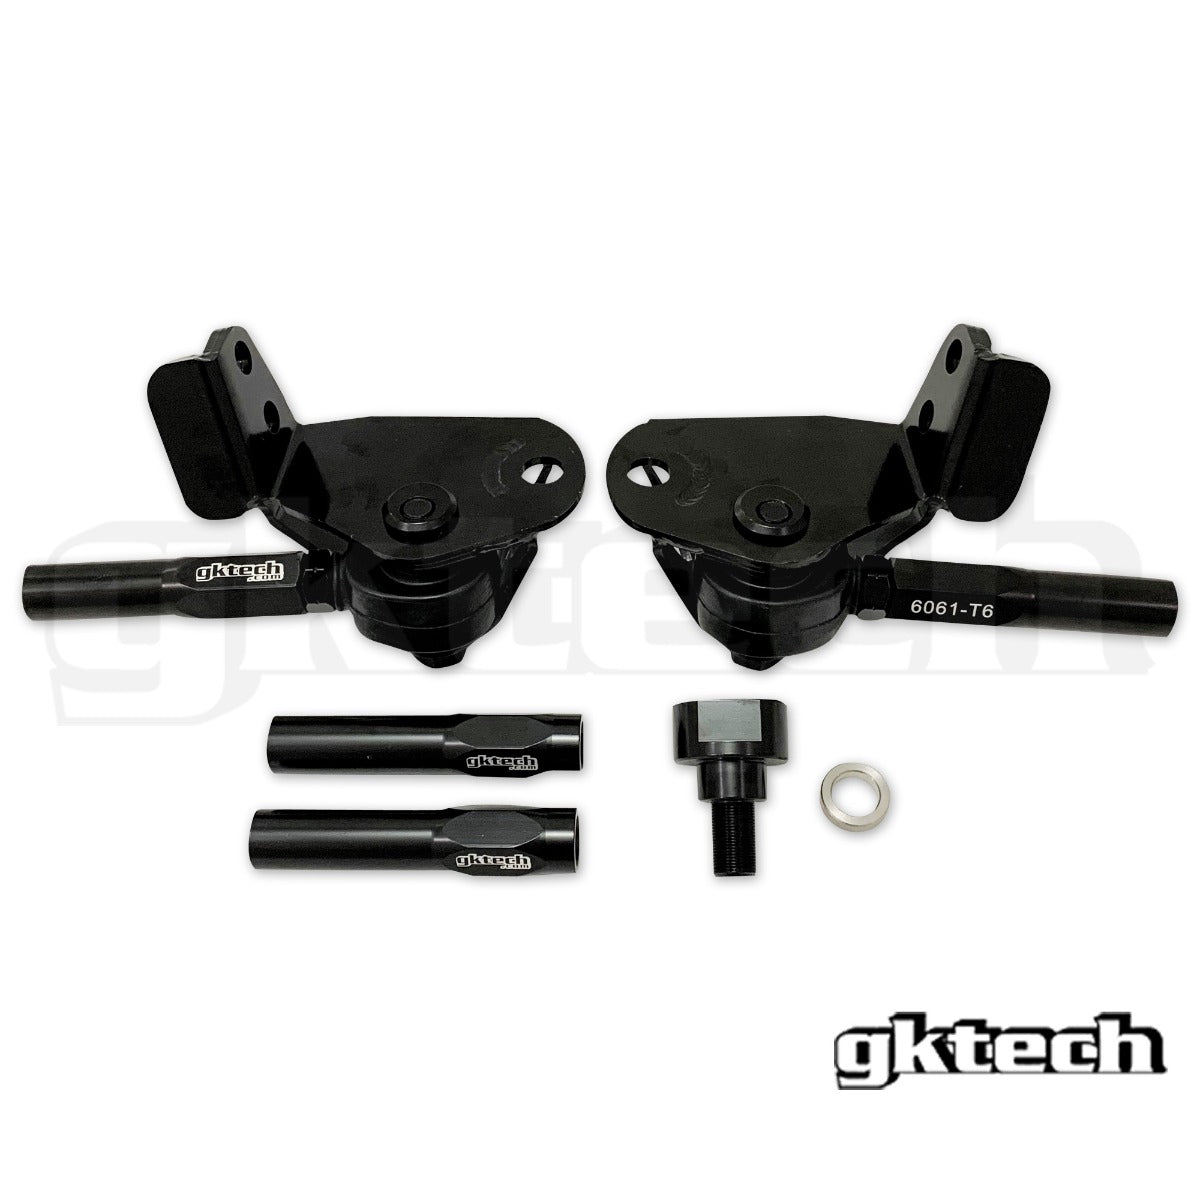 View of Infiniti G35/Nissan 350Z GKTECH Angle Kit - Featuring Adjustable Ackerman